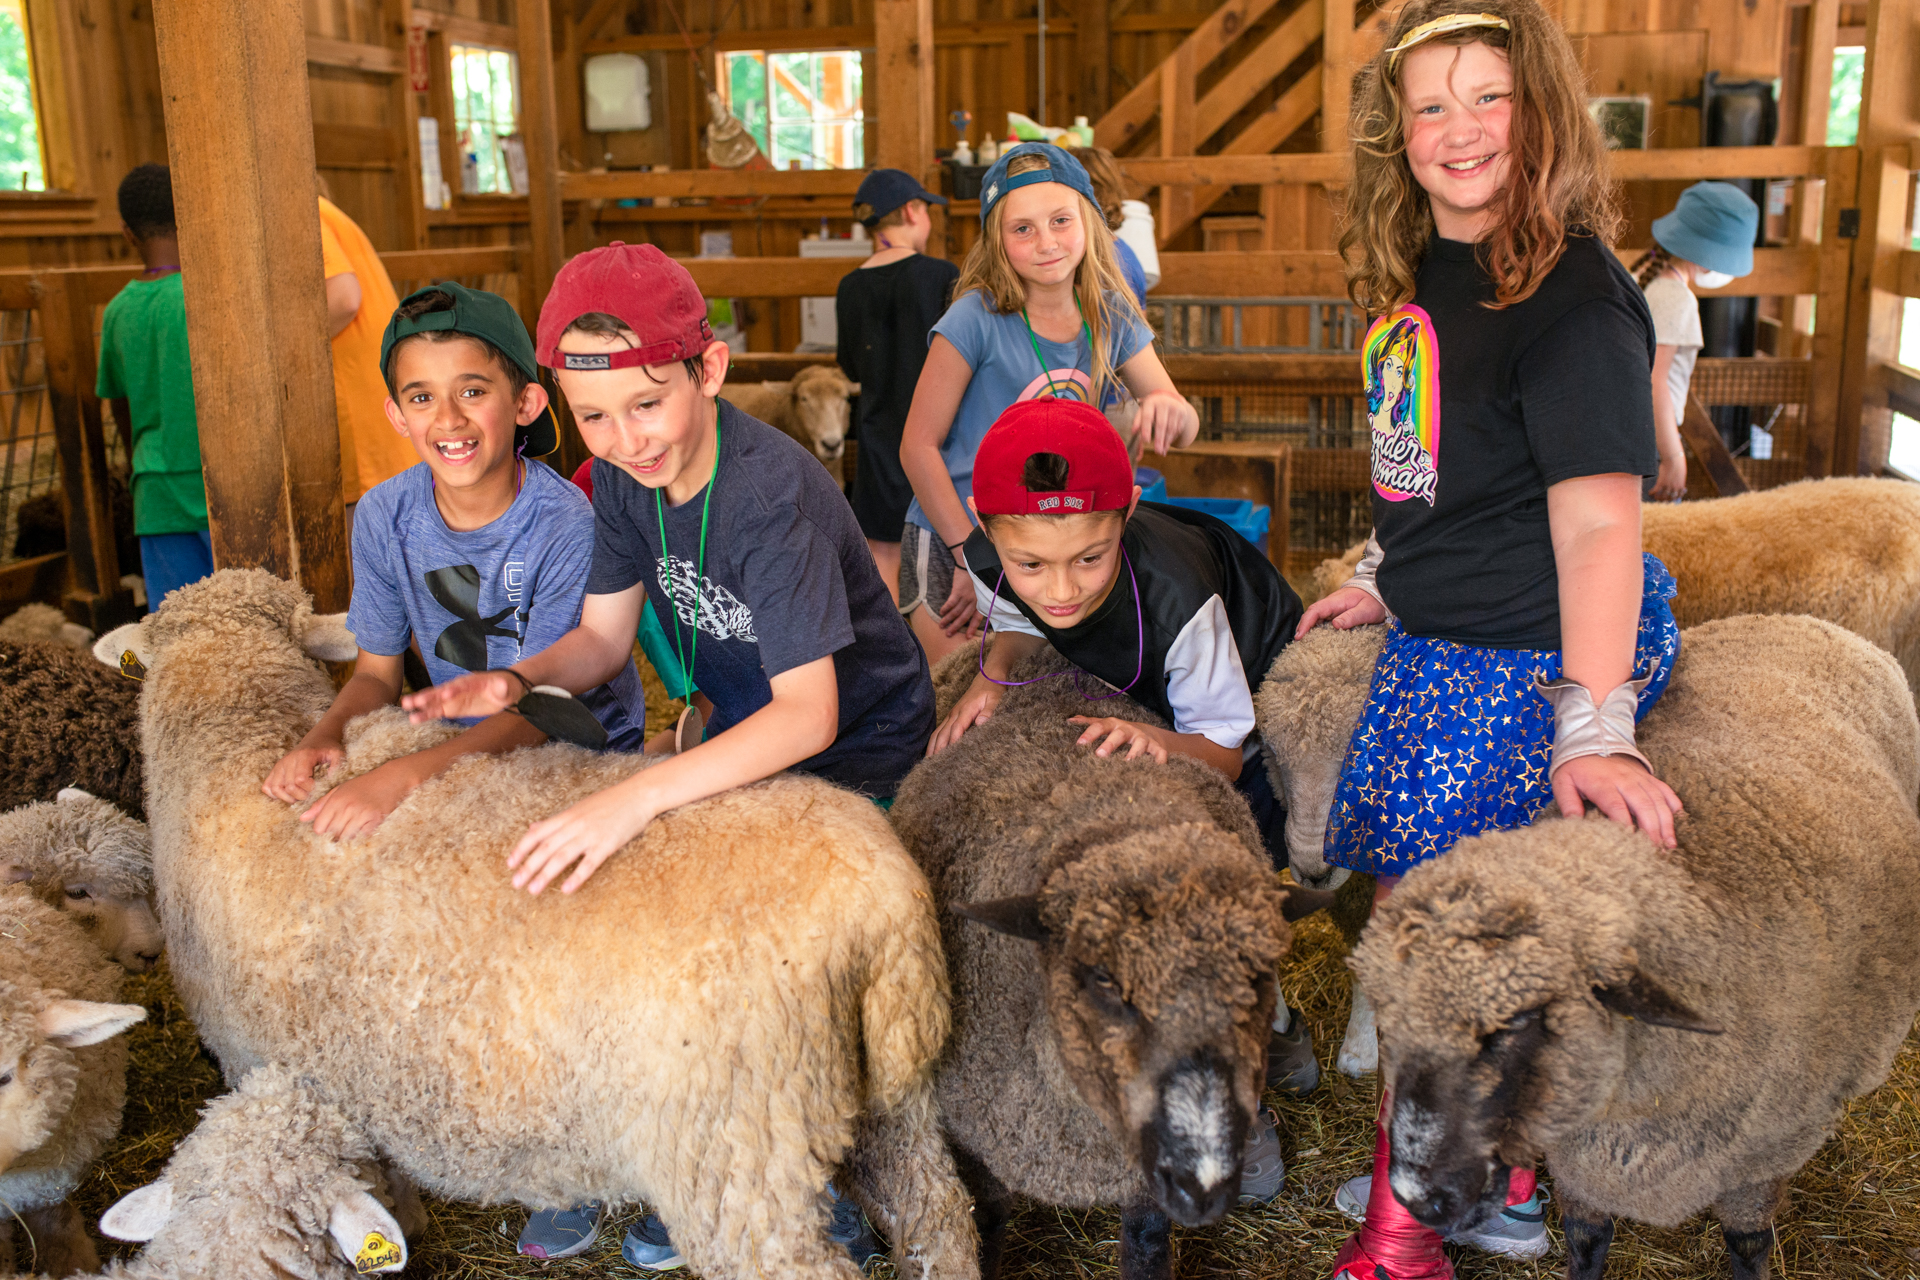 At Drumlin Farm Camp, campers in the Farmers age group petting sheep inside the Crossroads Barn